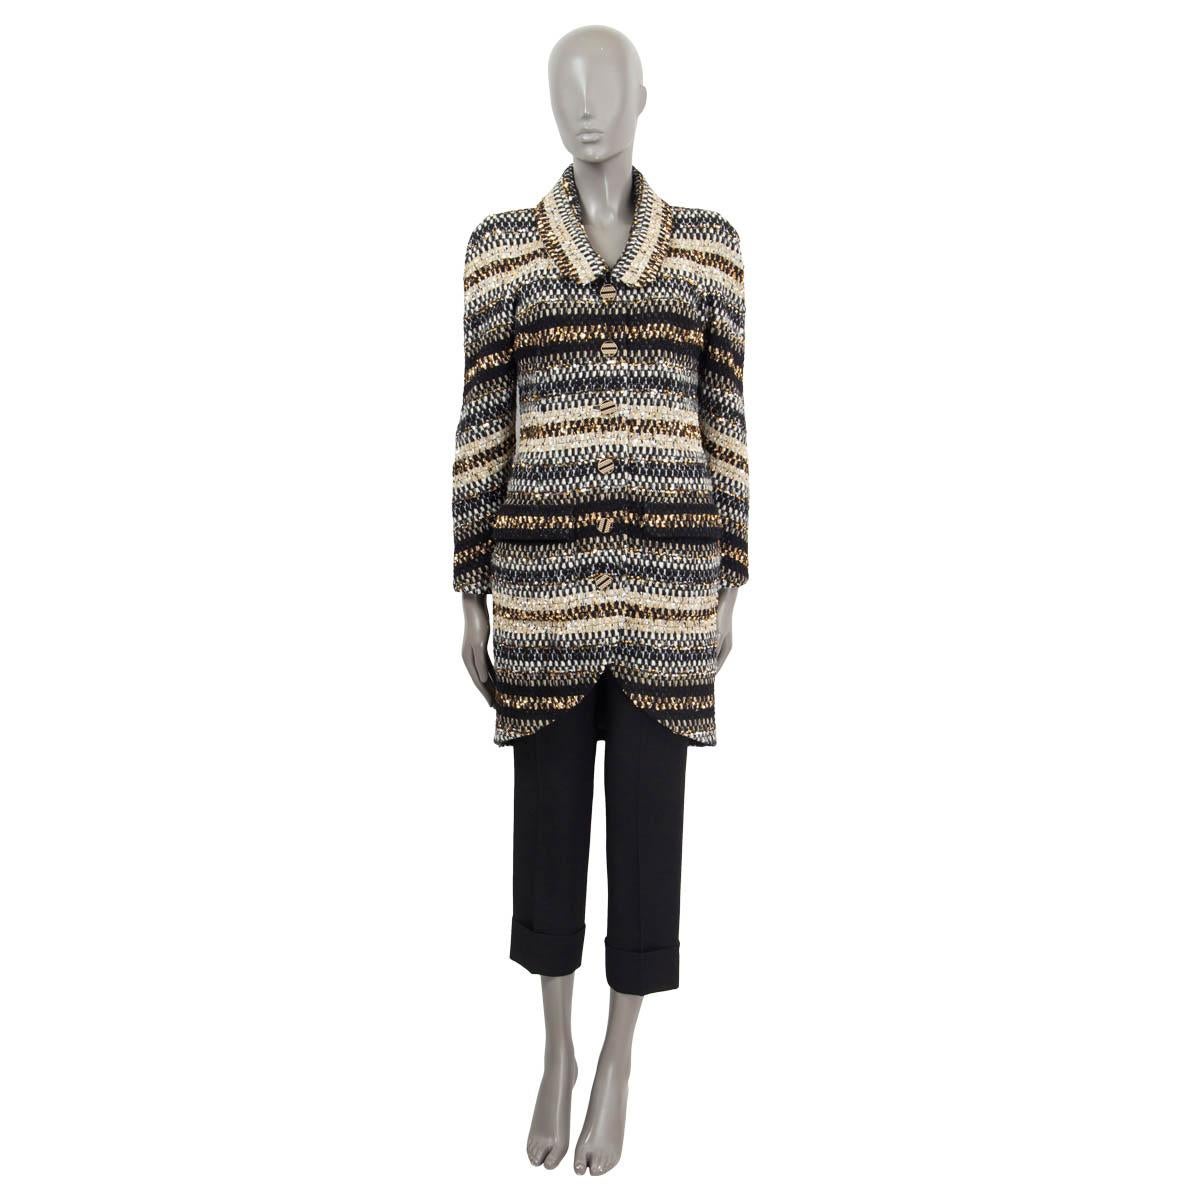 100% authentic Chanel lurex striped single breasted coat in black, beige, gold and off-white polyamide (46%), polyester (31%), wool (21%) and polyethylene (2%). Features two flap pockets on the front, long raglan sleeves (sleeve measurements taken